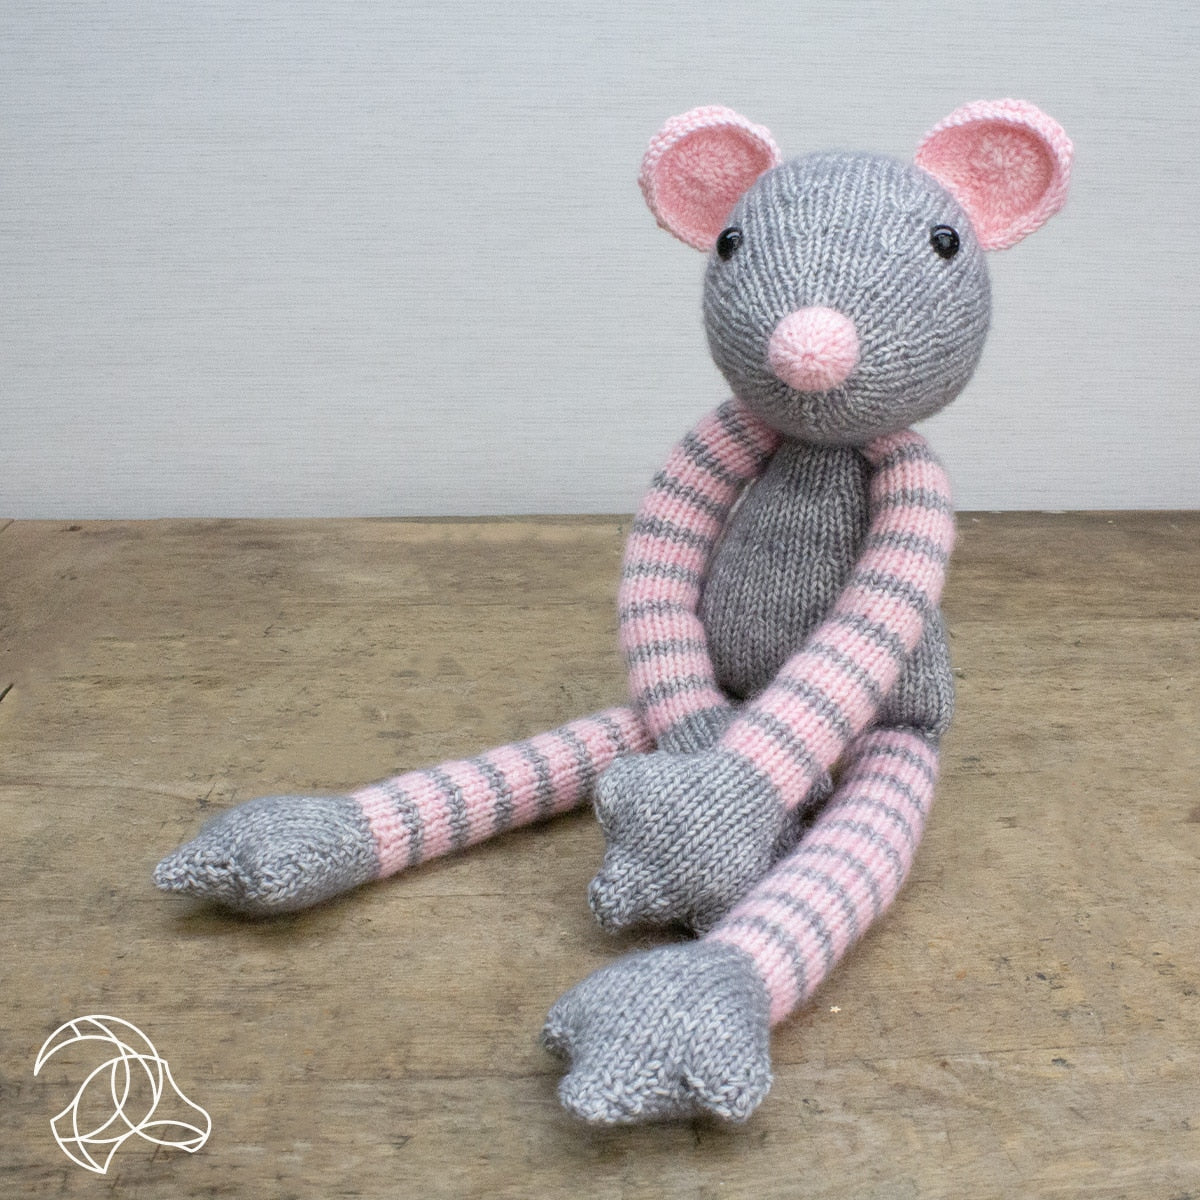 Esther the Mouse - Gorgeous Knitting Kit from Hardicraft